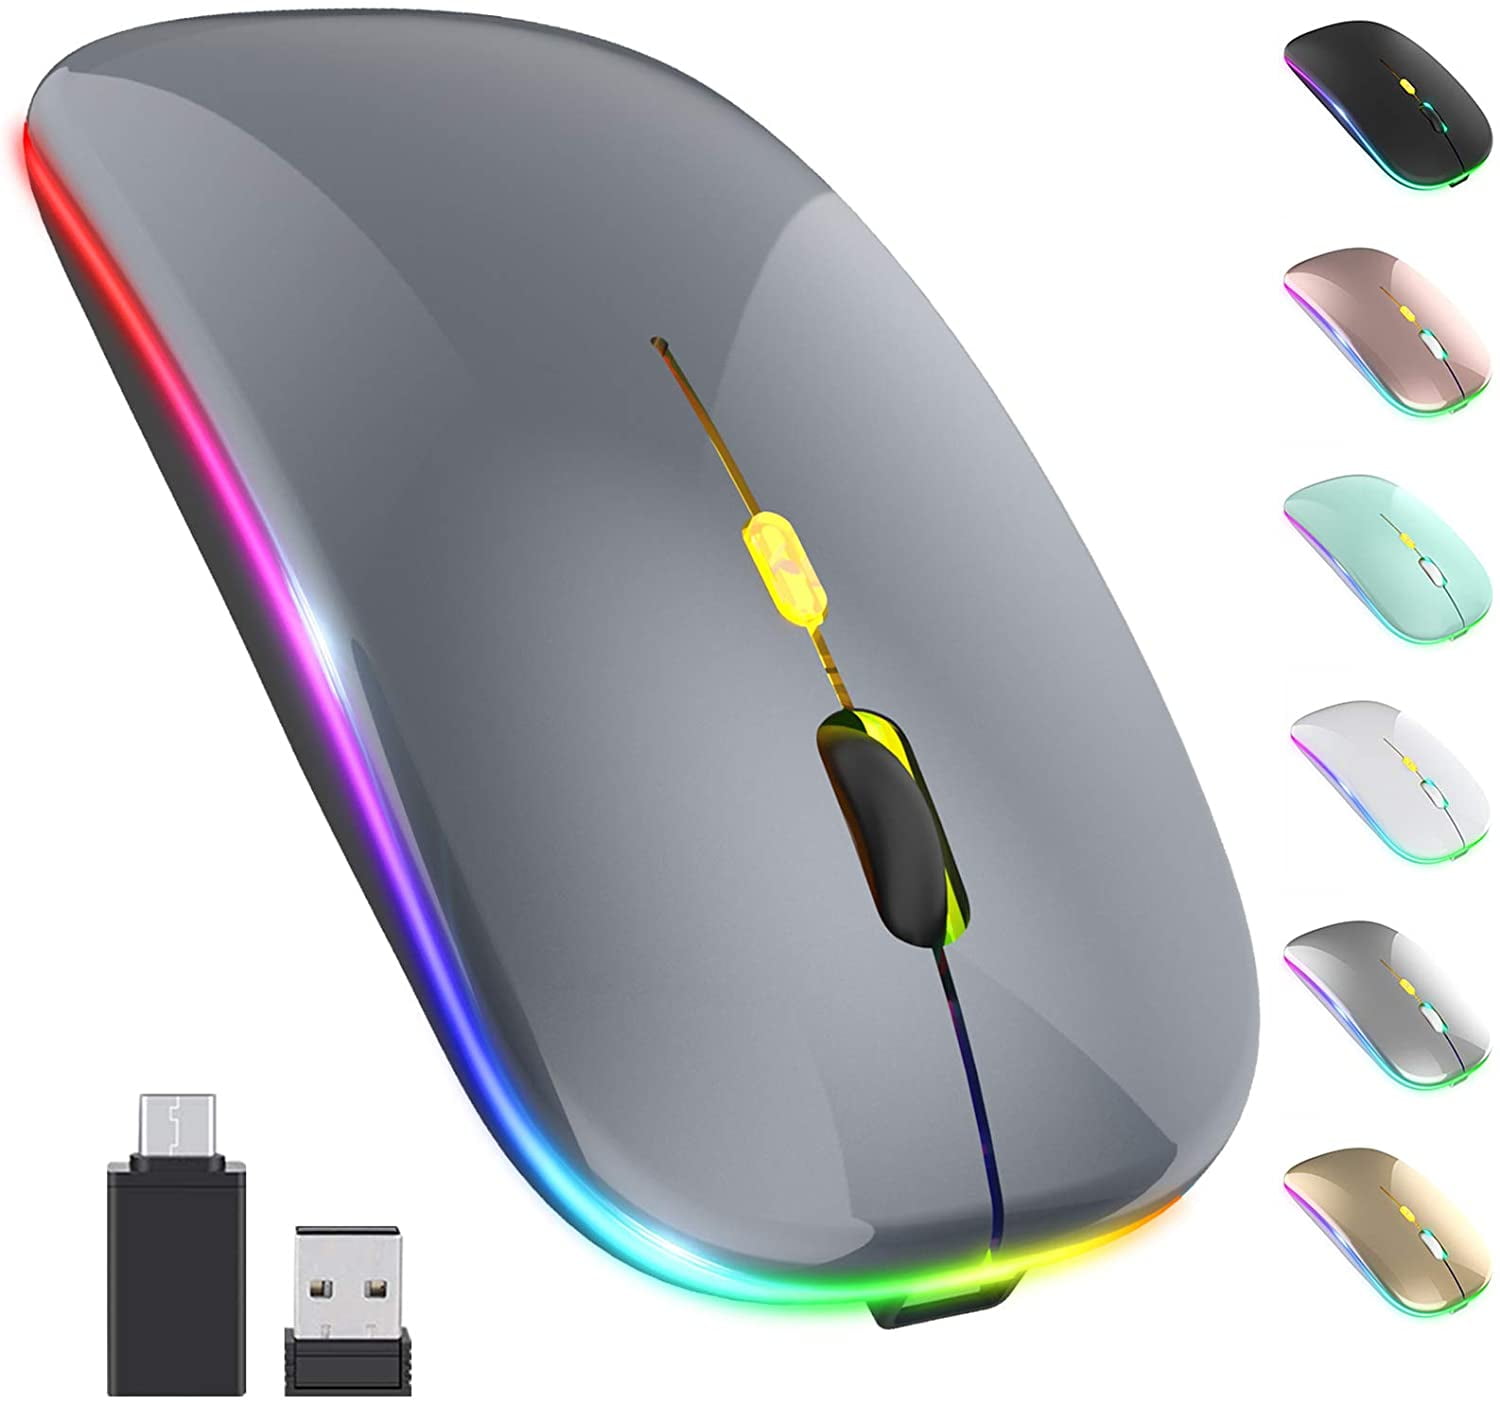 G12 Slim Rechargeable Wireless Silent Mouse 2.4G Portable USB Optical Wireless Computer Mice with USB Receiver and Type C Adapter LED Wireless Mouse Purple